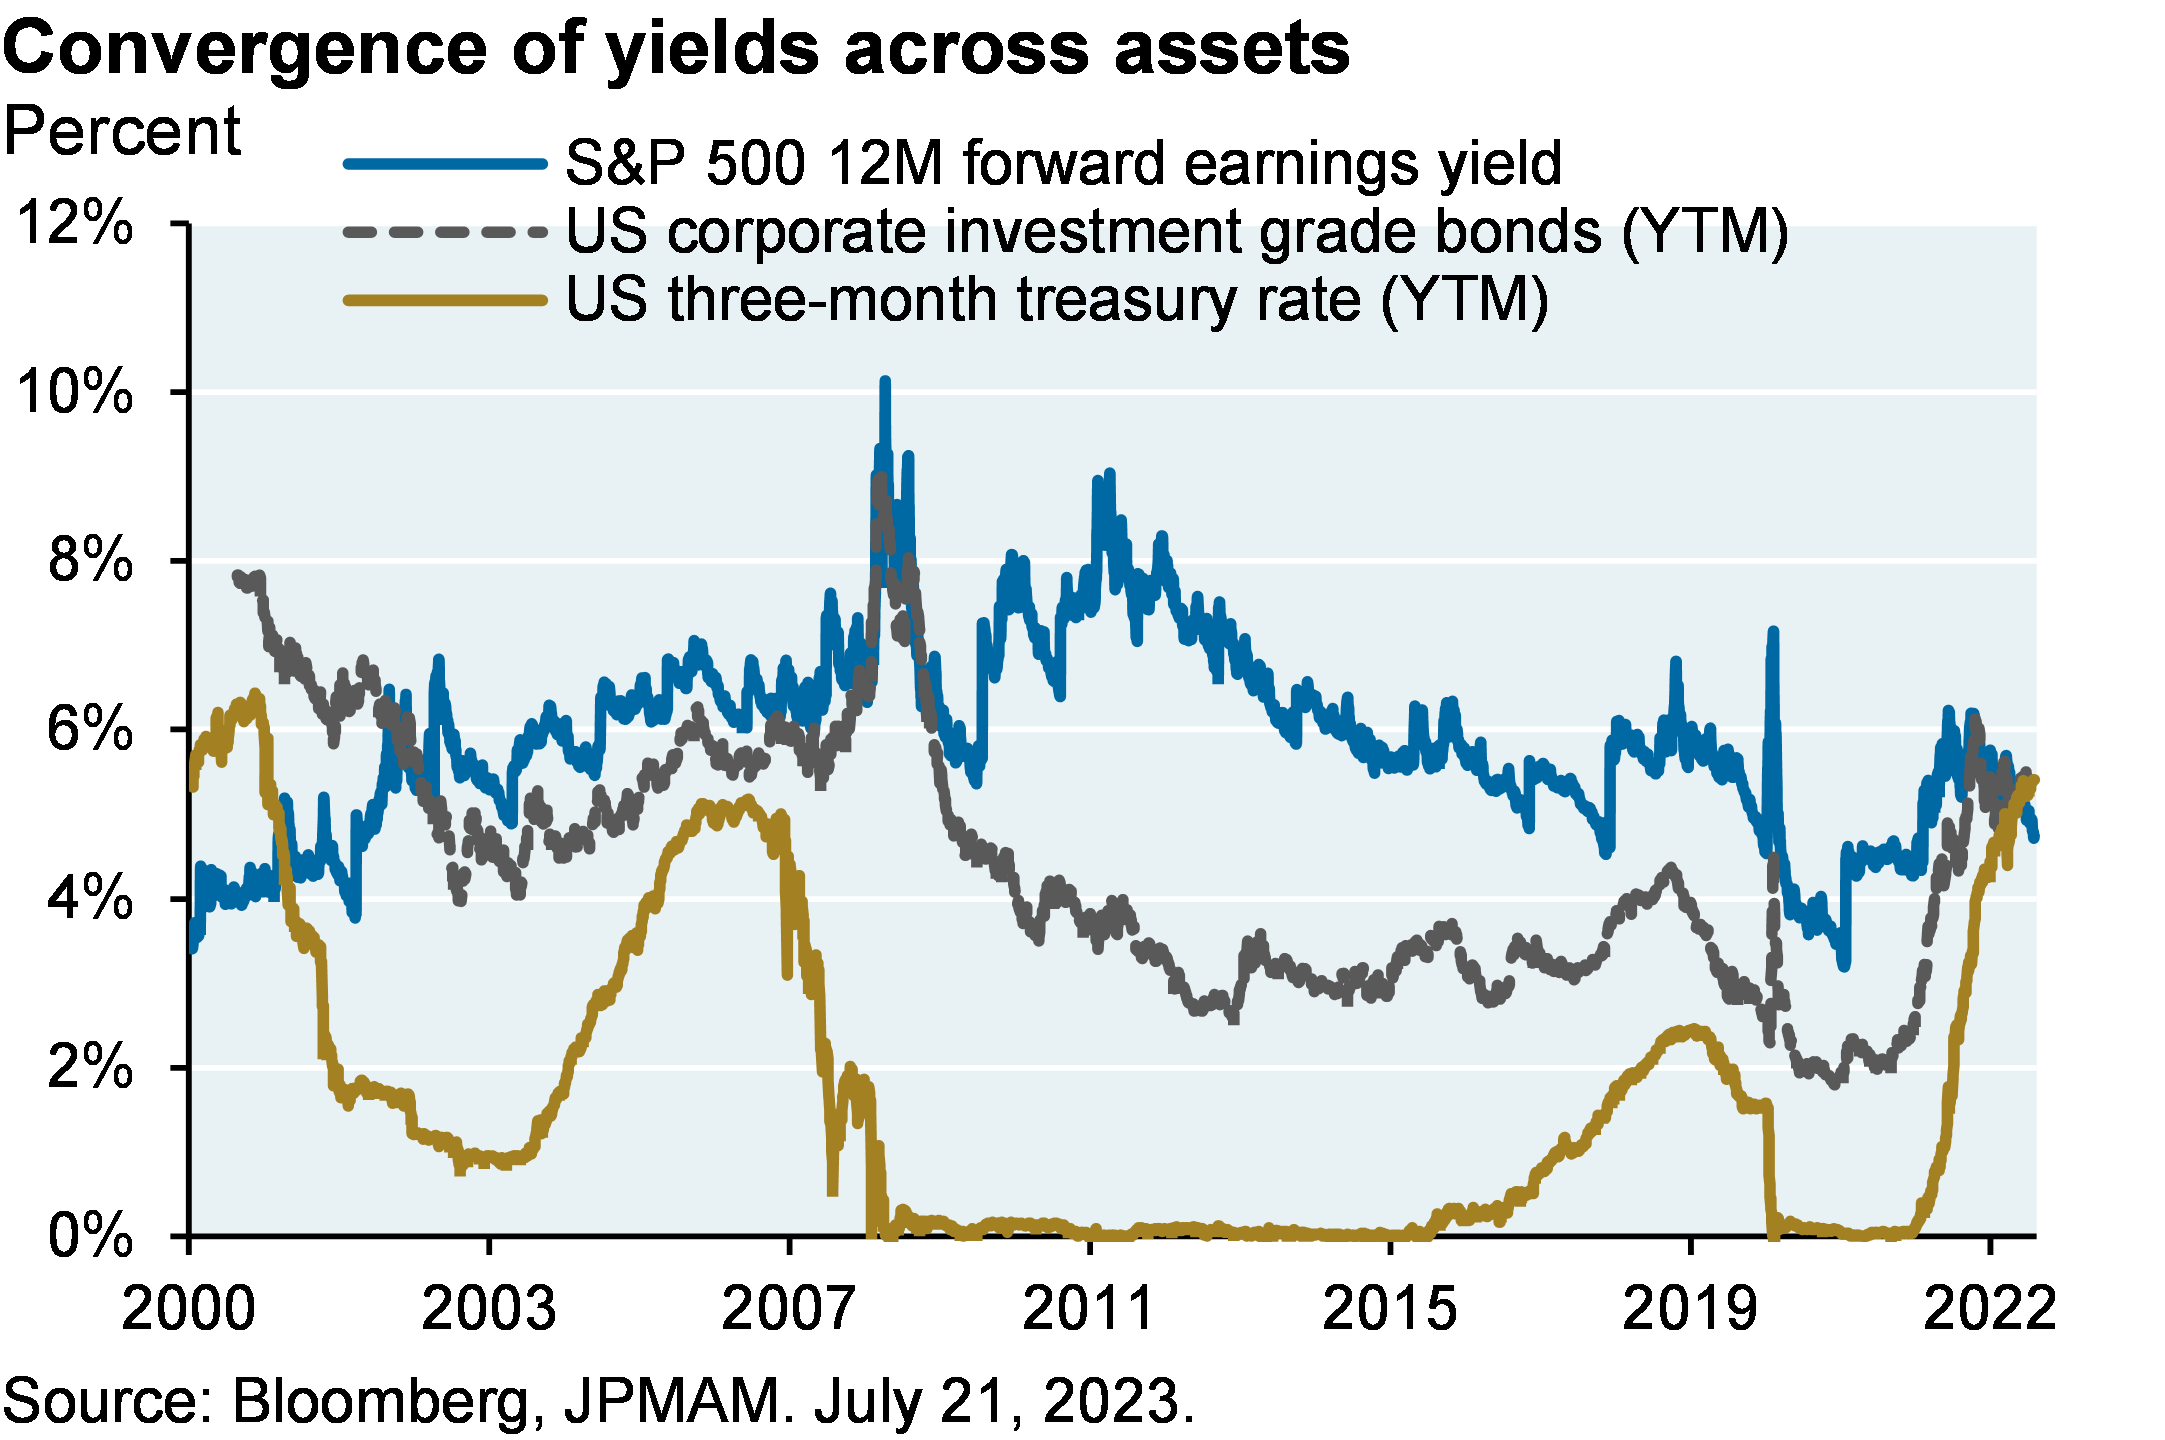 Line chart shows the convergence of yields across three assets from 2000 through the present: S&P 500 12m forward earnings yield, US corporate investment grade bonds, and the US three-month treasury rate. All three assets have converged for the first time since 2002.